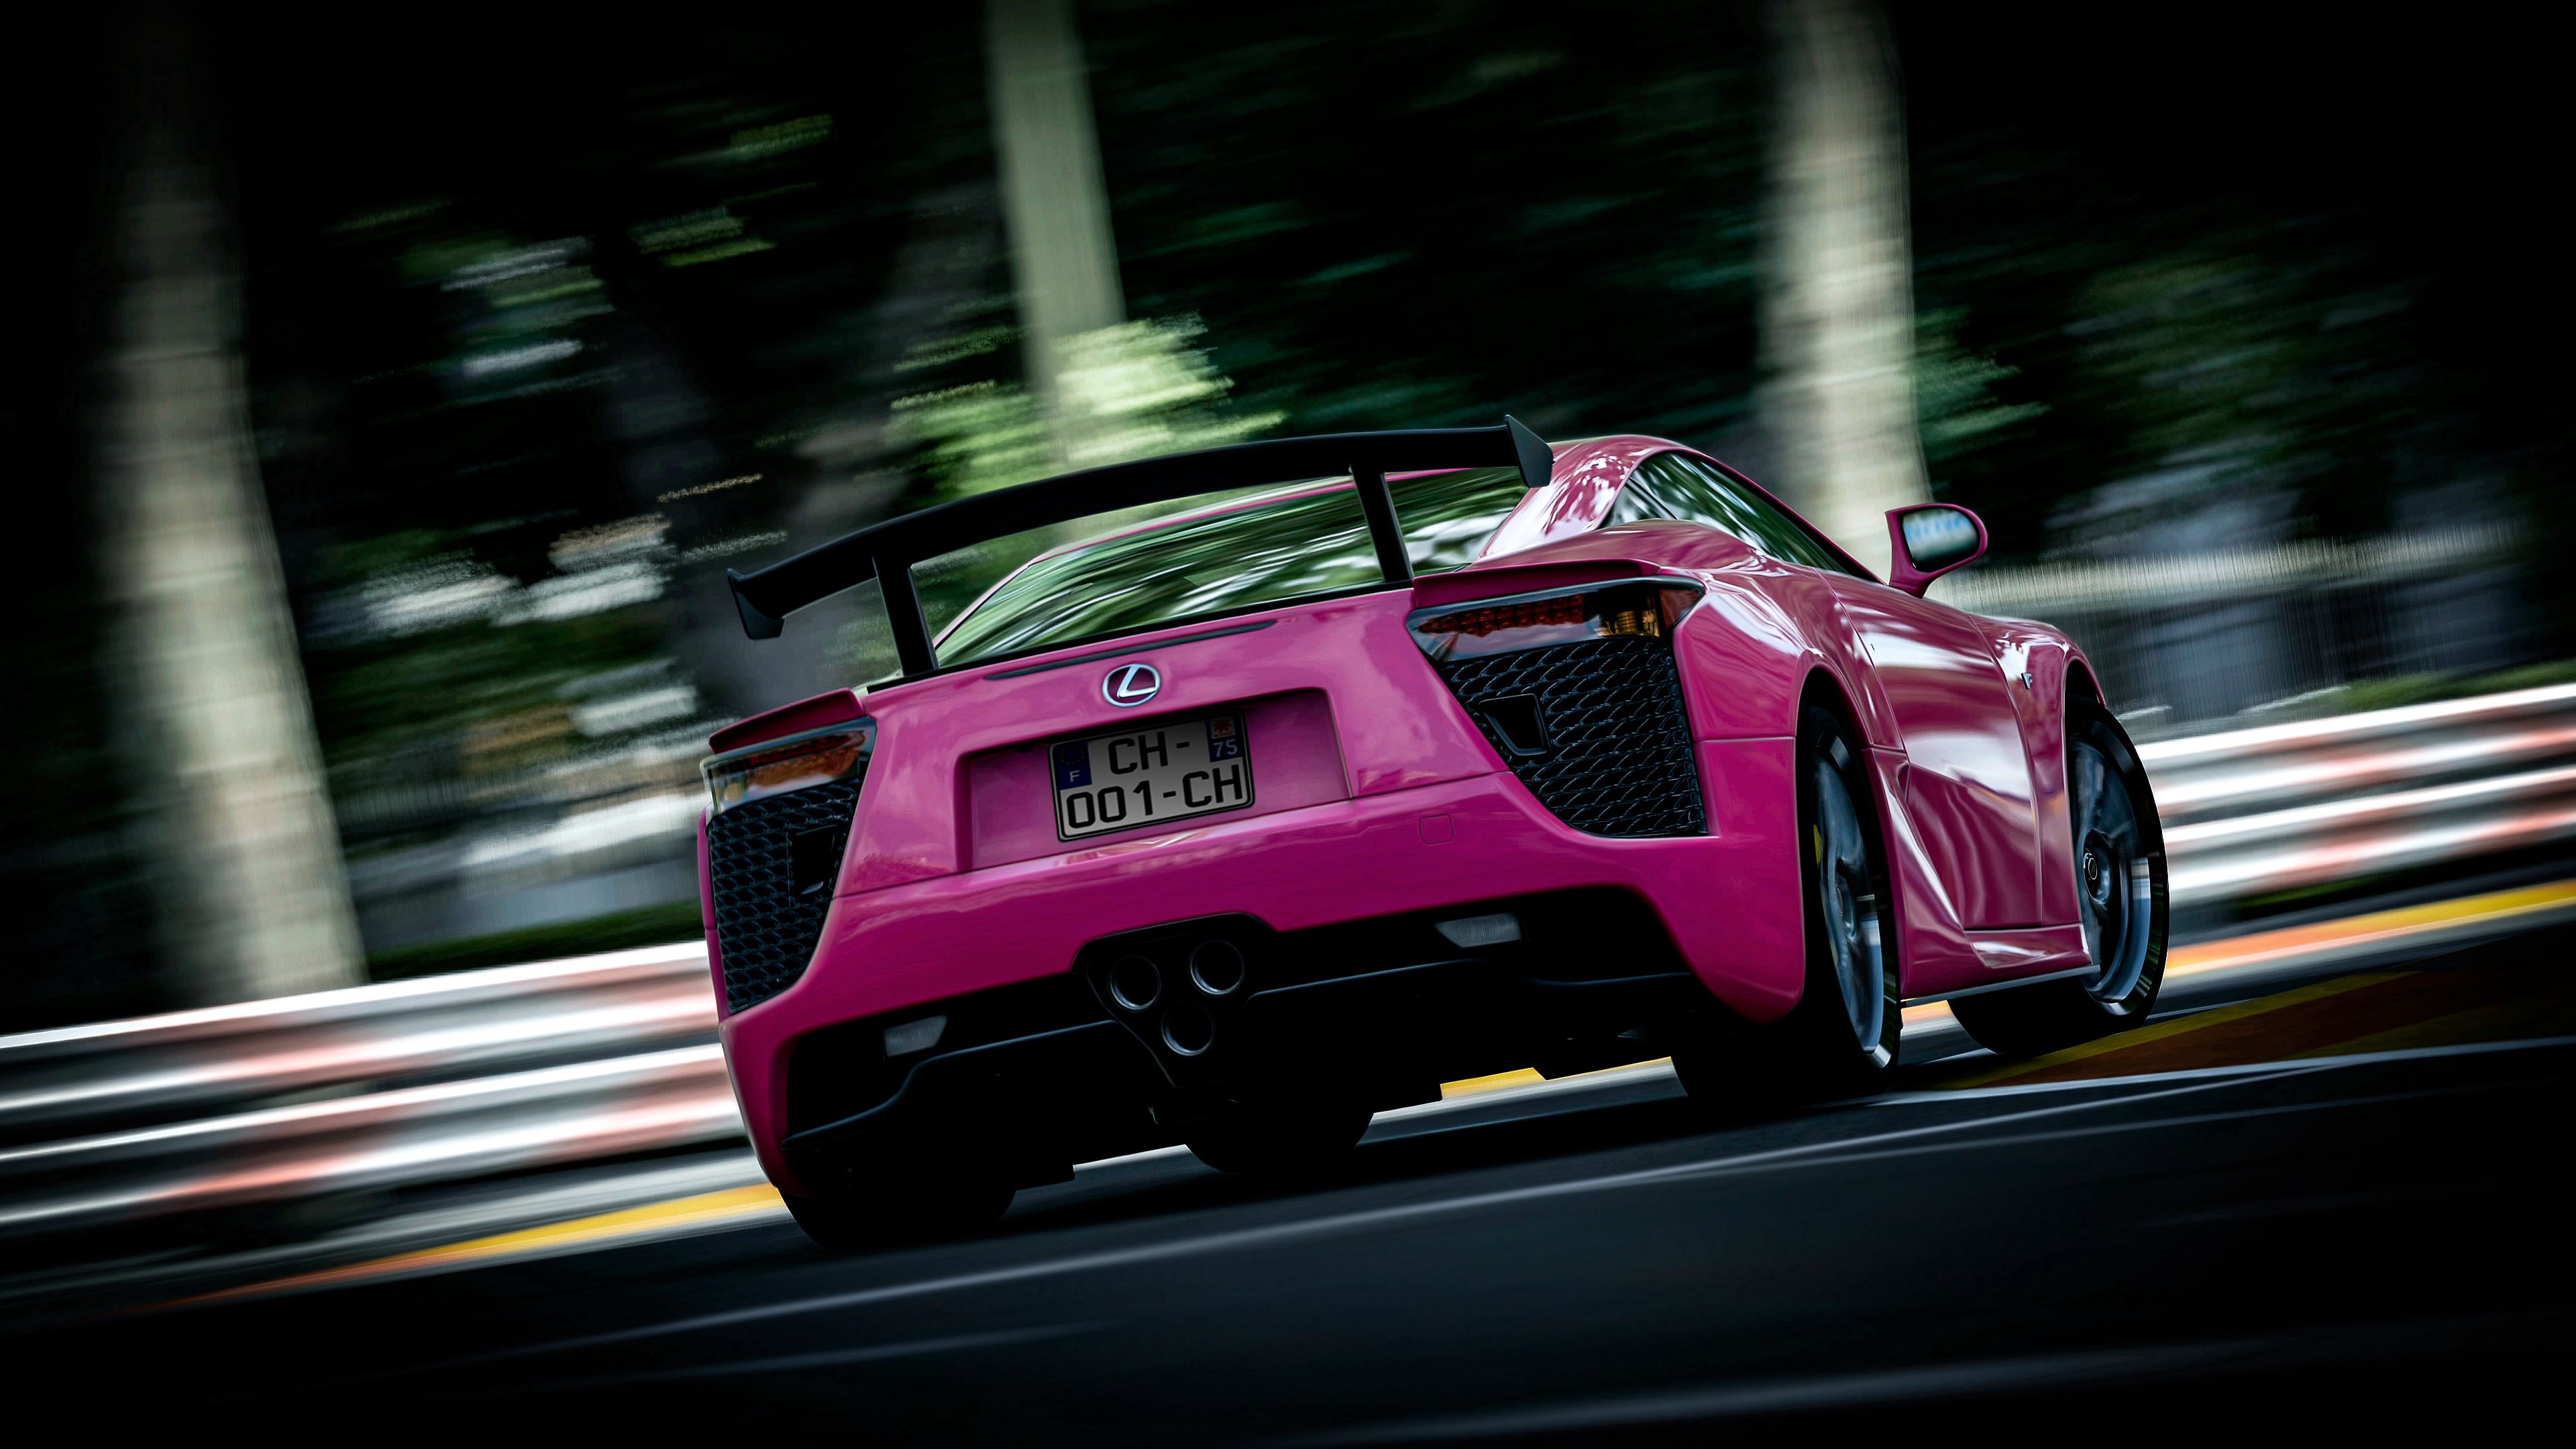 lexus, blur, sports car, cars, pink, sports, smooth, back view, rear view